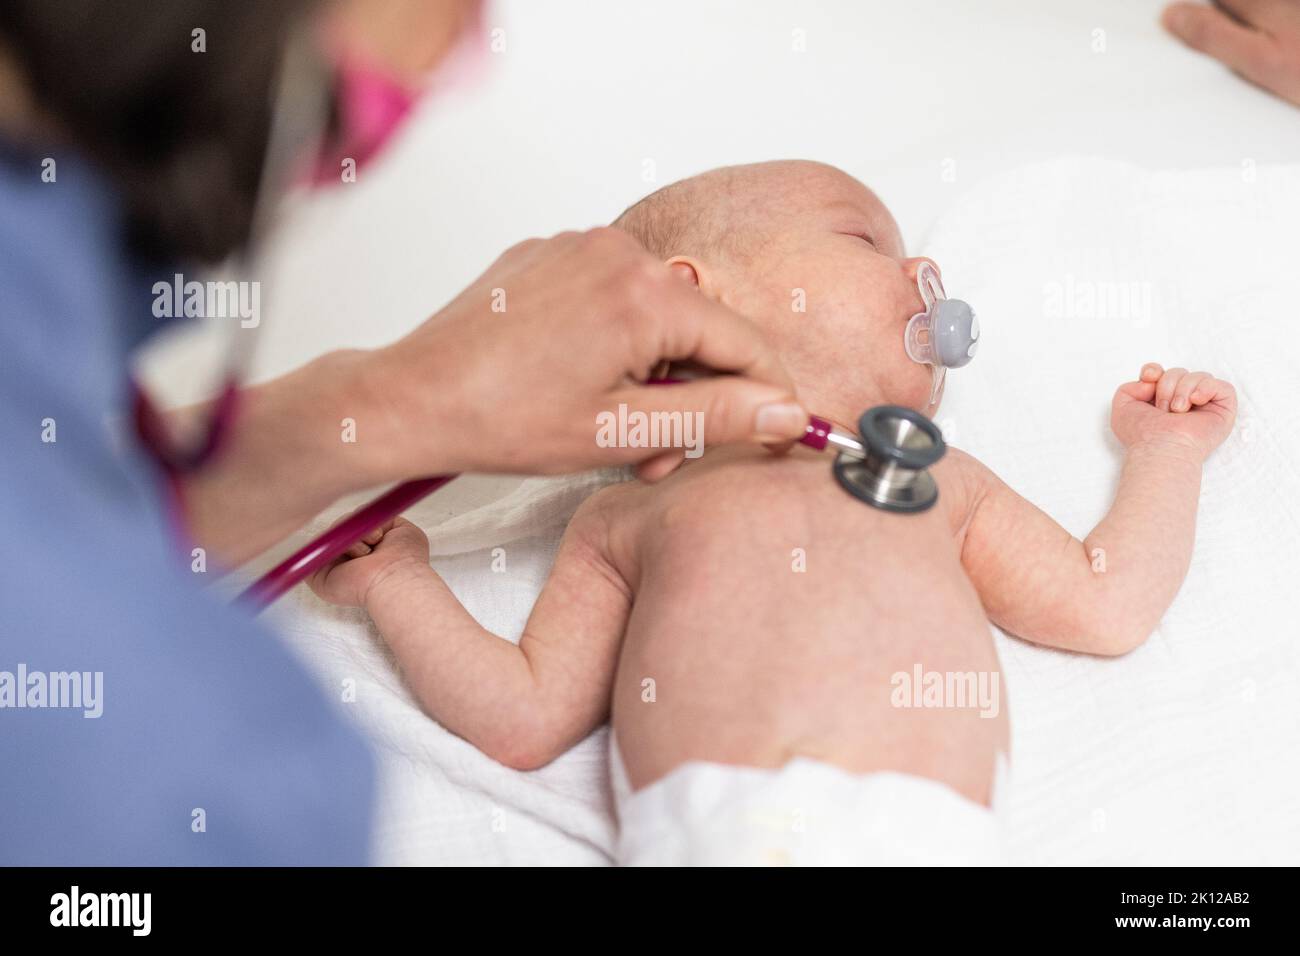 Baby lying on his back as his doctor examines him during a standard medical checkup Stock Photo